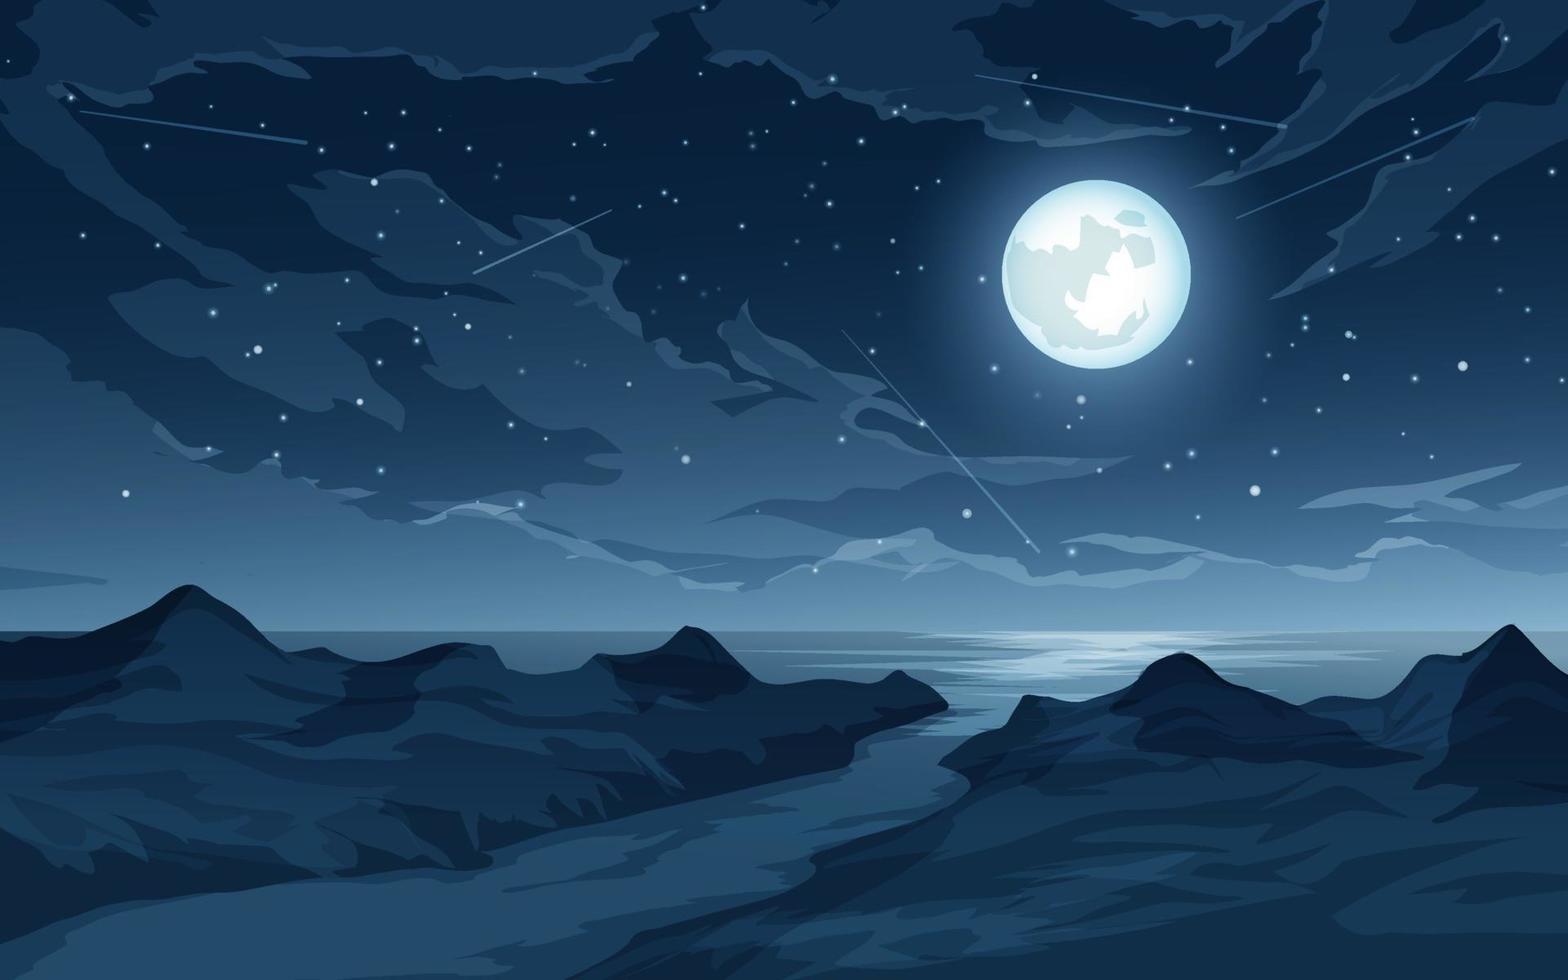 Night illustration with full moon, stars, shooting stars, cloud, sea and river vector